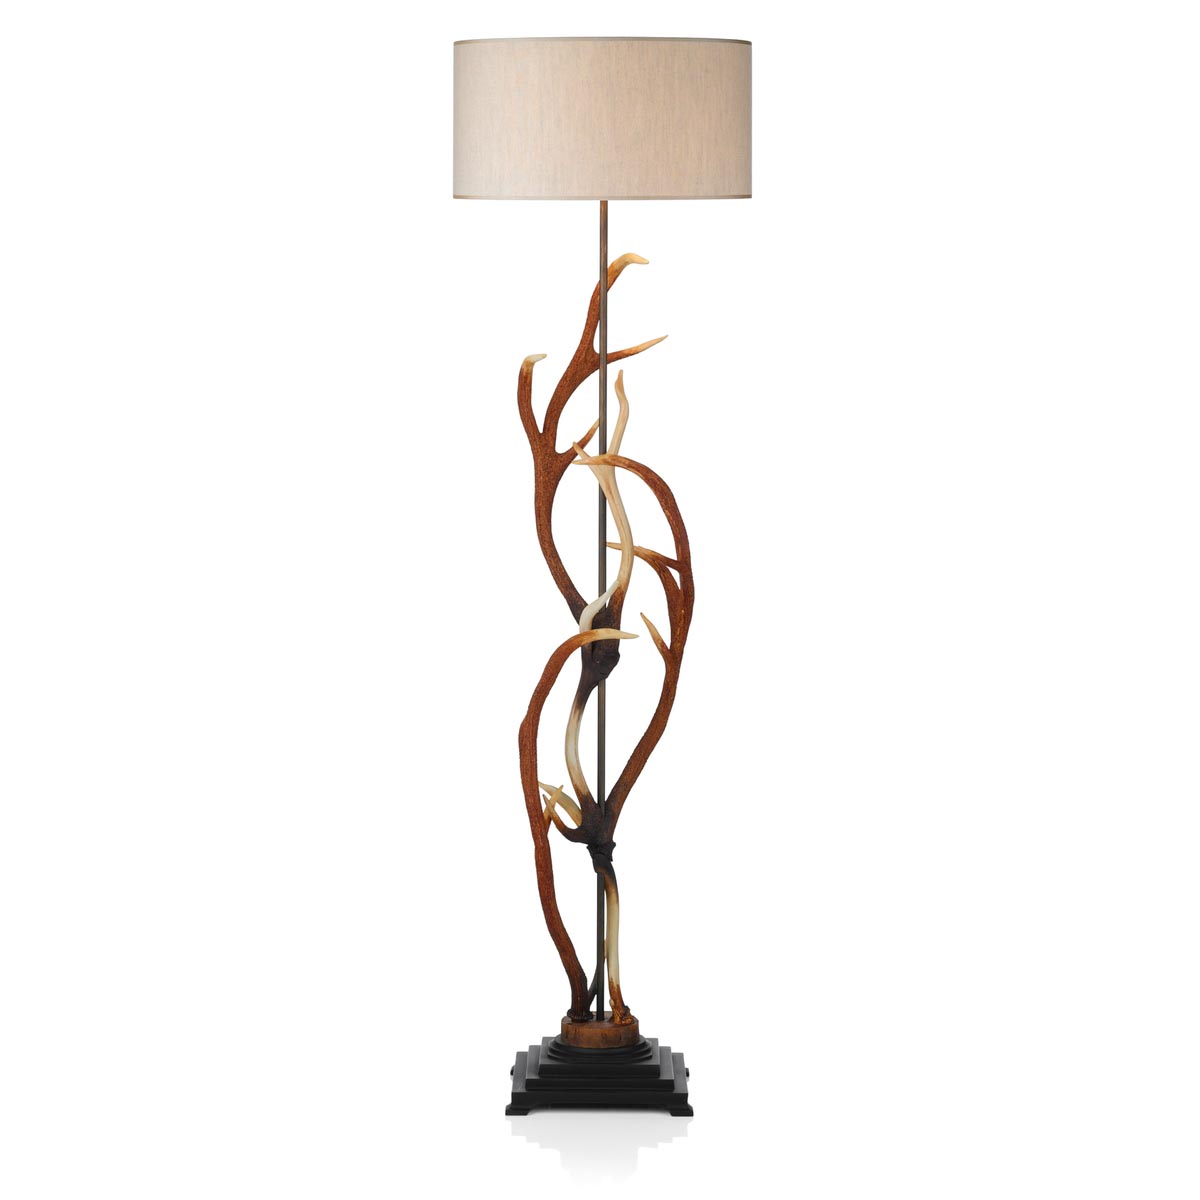 Rustic Floor Lamp with Table